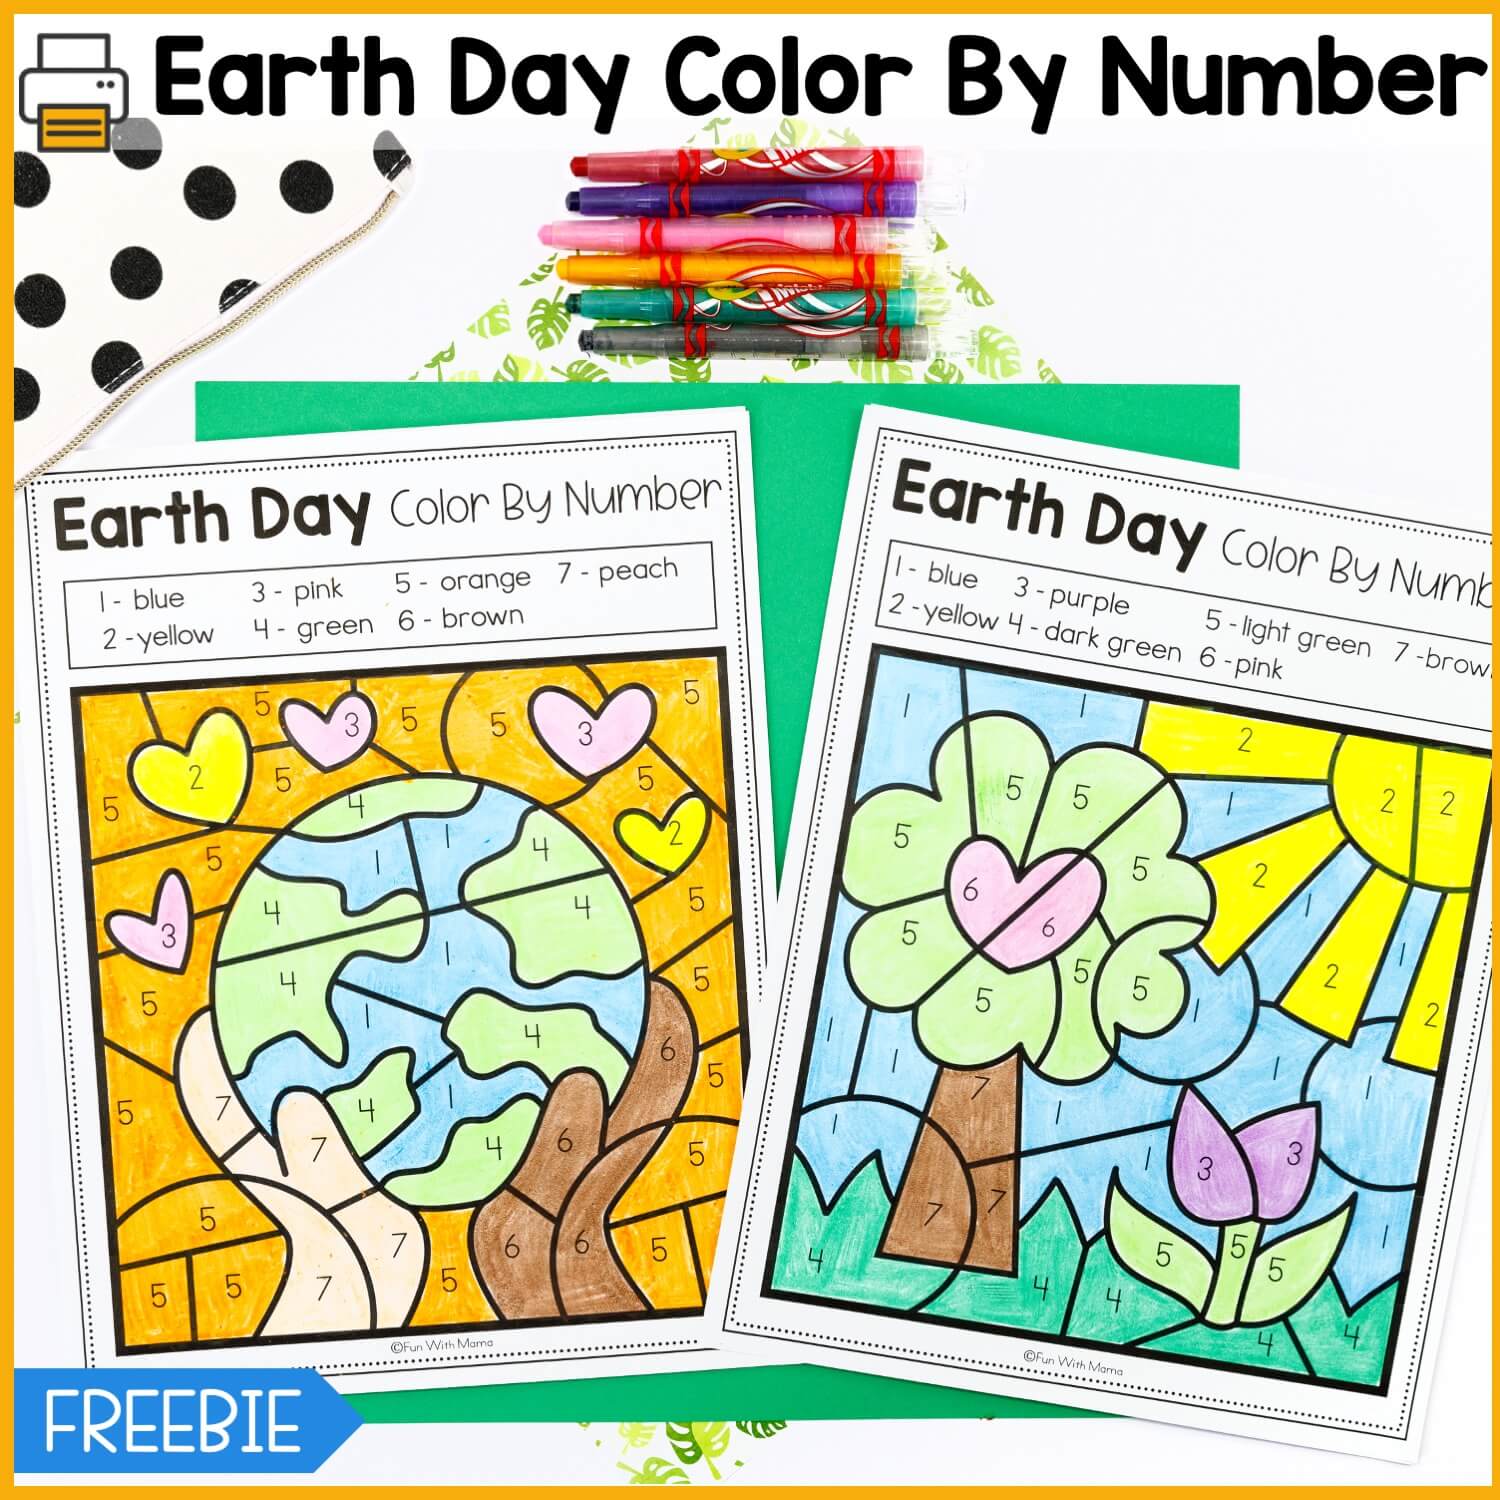 Earth Day Color By Number Printables colored in